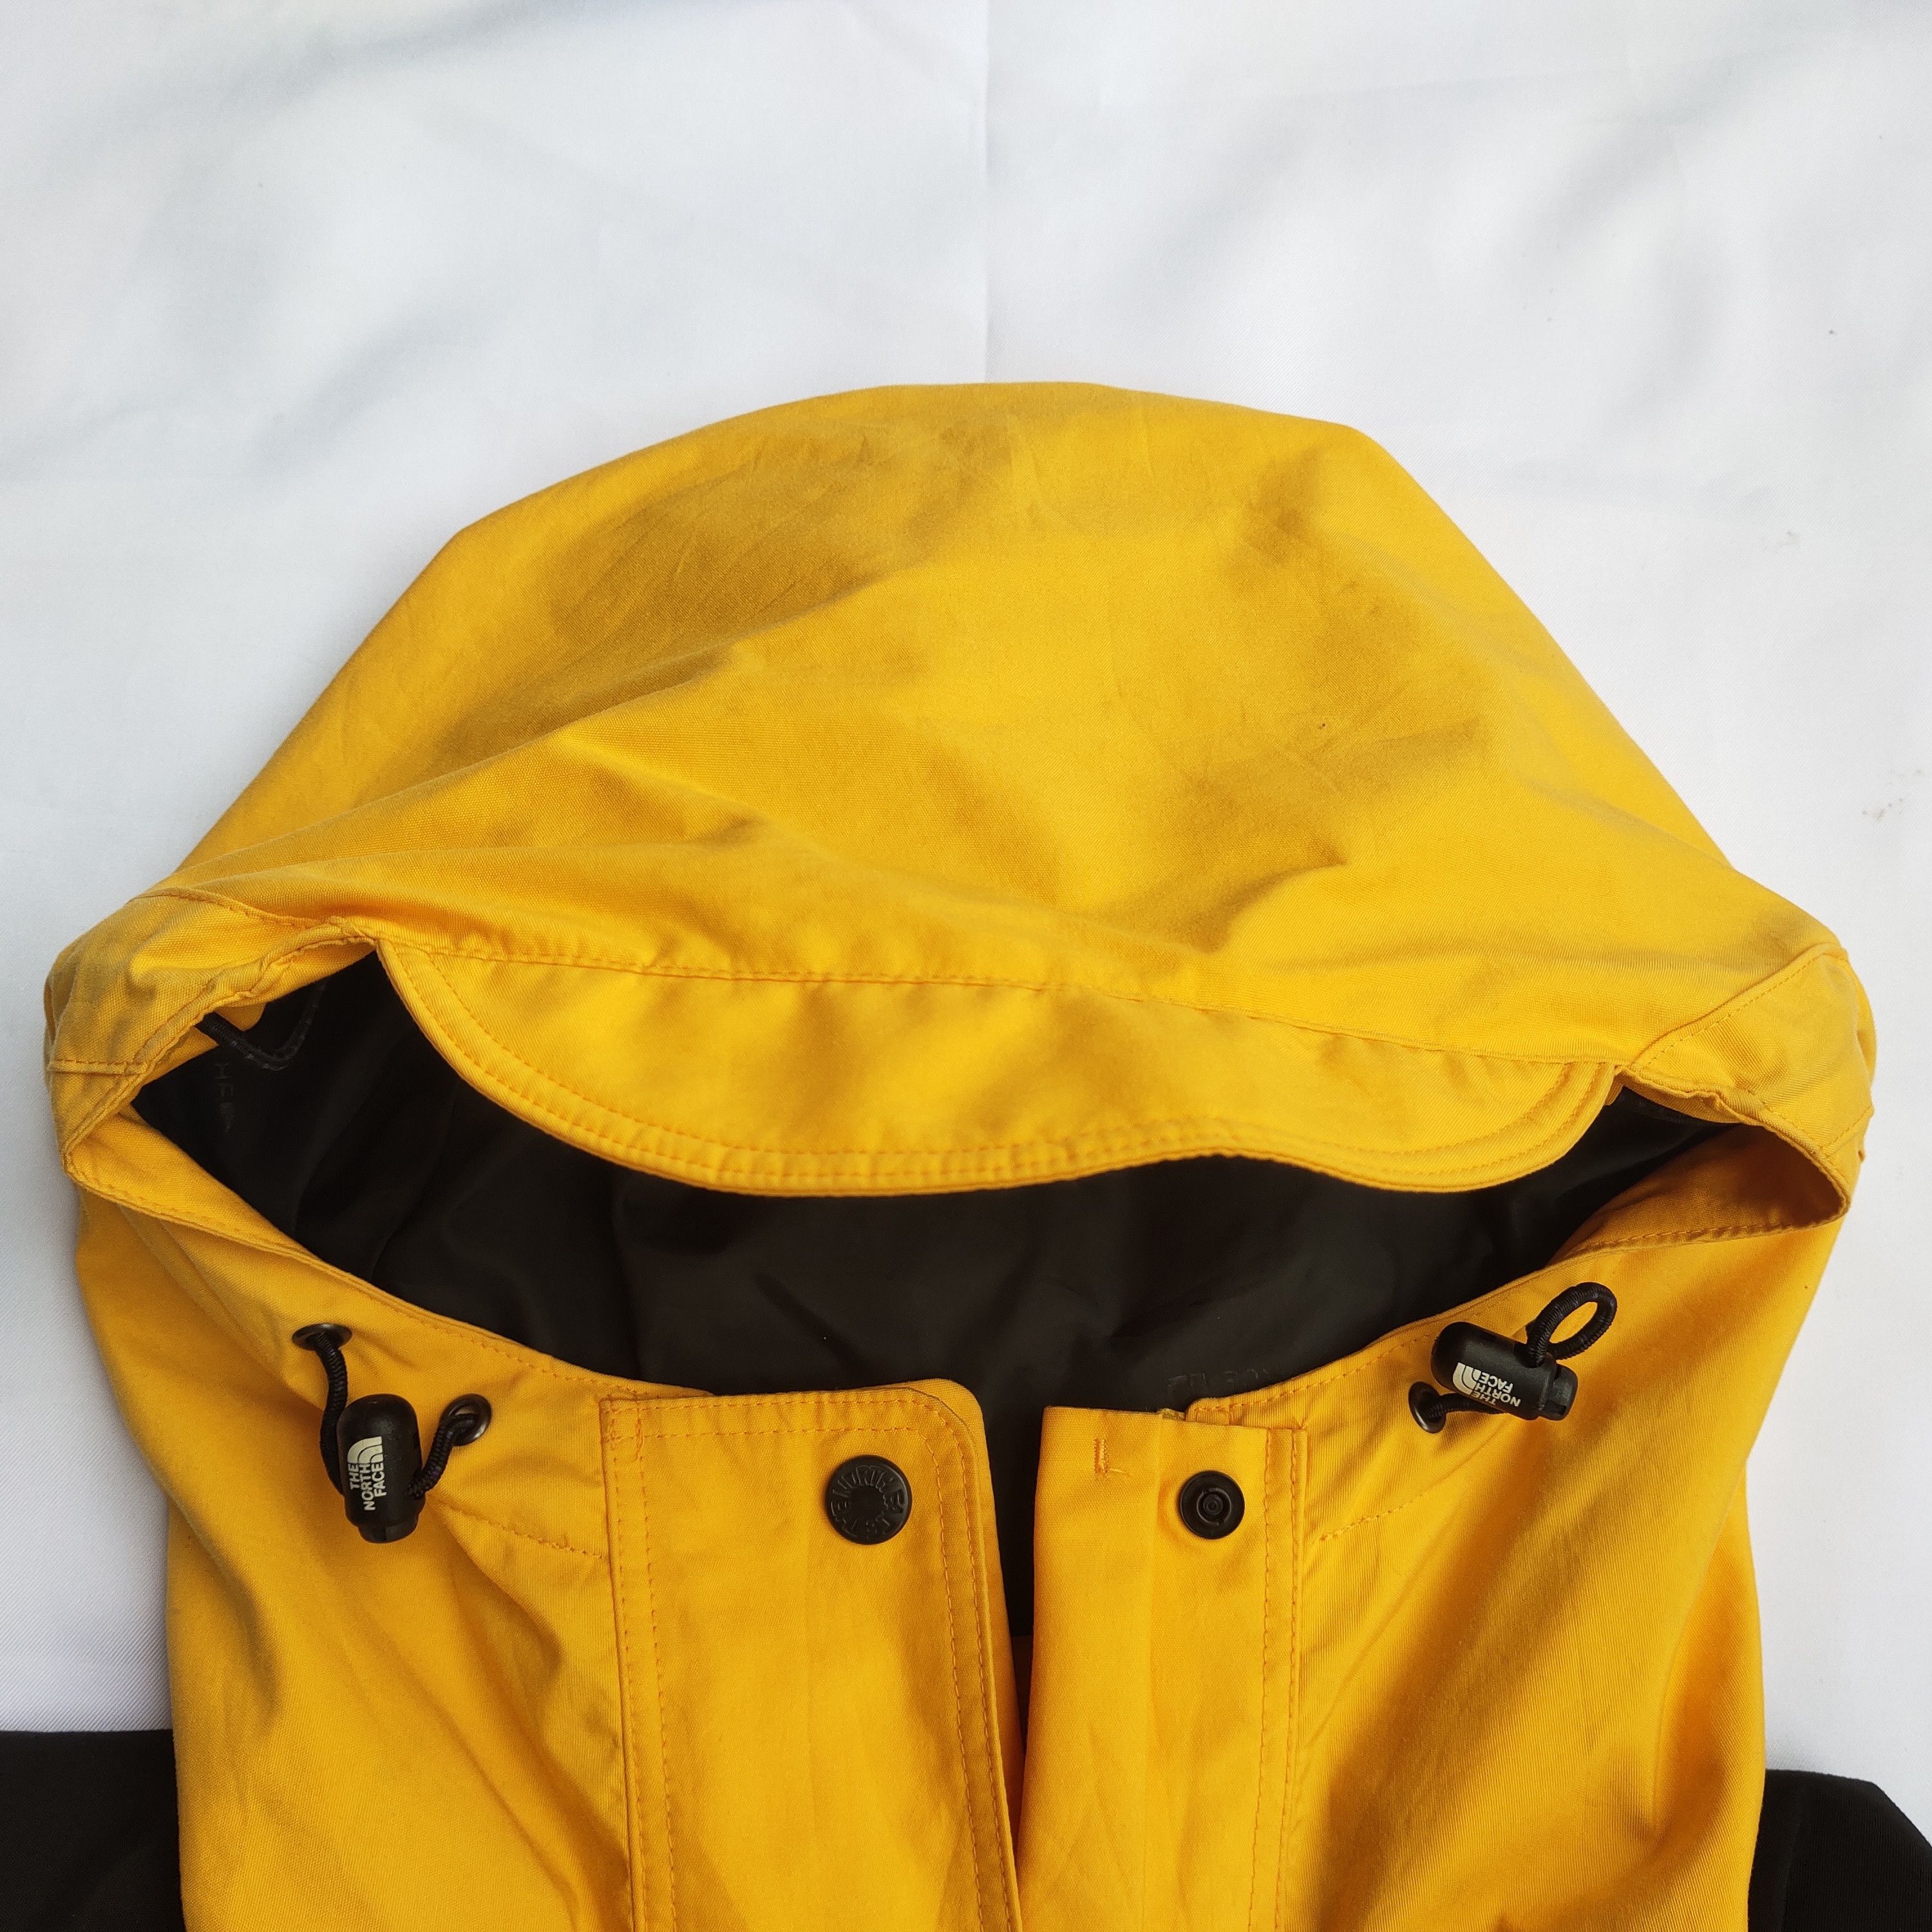 The North Face Vintage North Face Gore-Tex Yellow Jacket Size US M / EU 48-50 / 2 - 5 Thumbnail